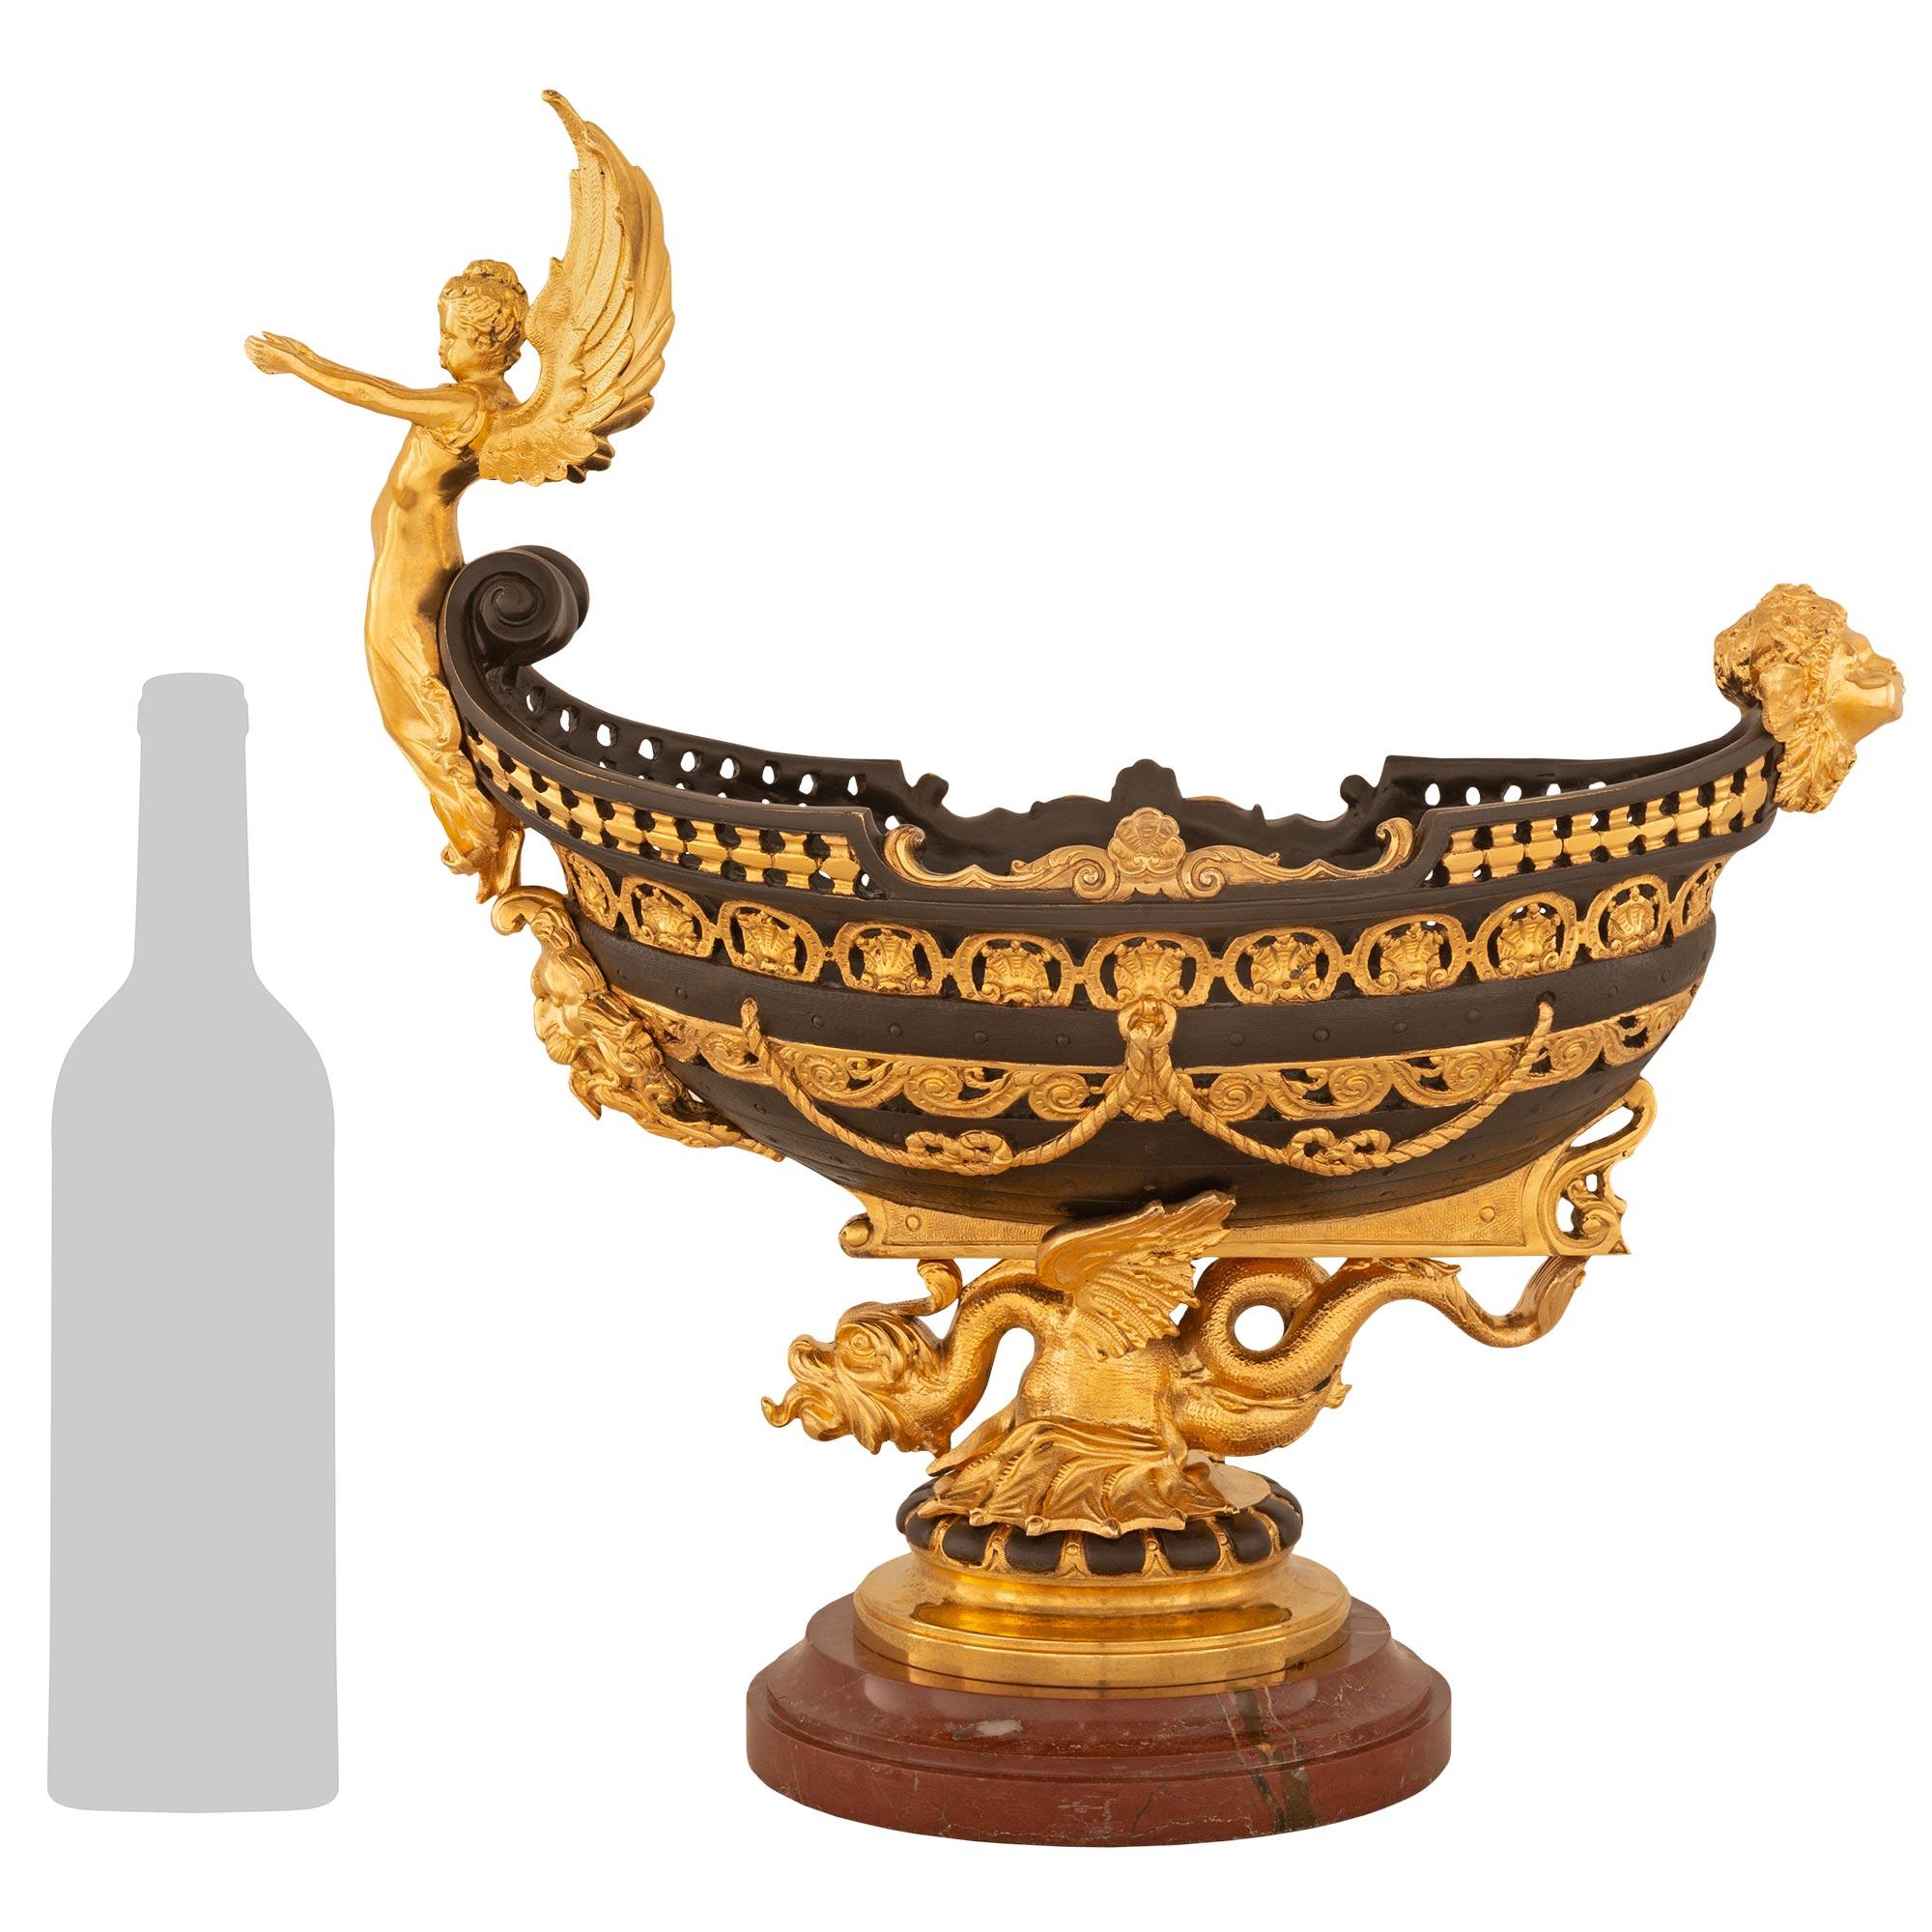 








A striking French 19th century Renaissance st. Patinated Bronze, Ormolu and marble centerpiece possibly by Barbedienne. The centerpiece is raised on an oval marble mottled base below the Ormolu support with patinated cabochons and a